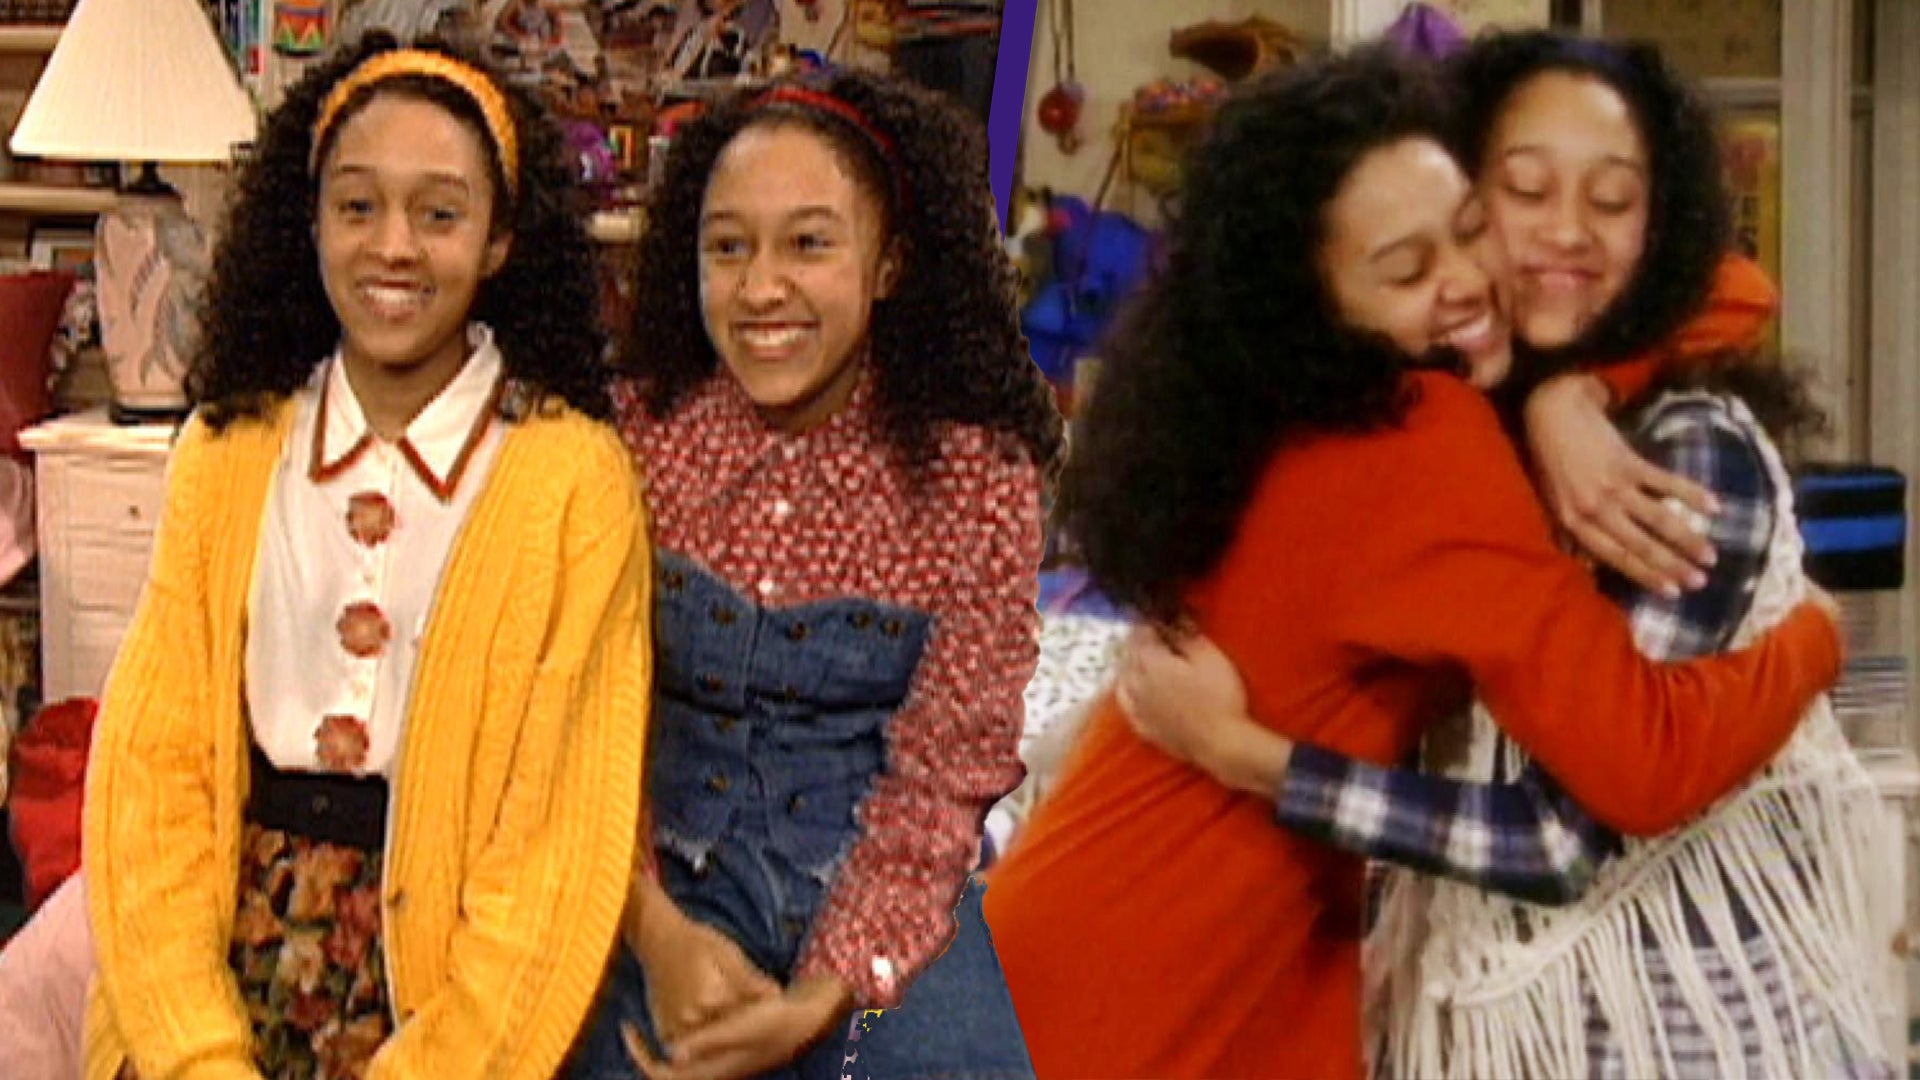 Sister, Sister' Turns 20! Tia and Tamera Mowry's On-Set Interviews (Flashback)